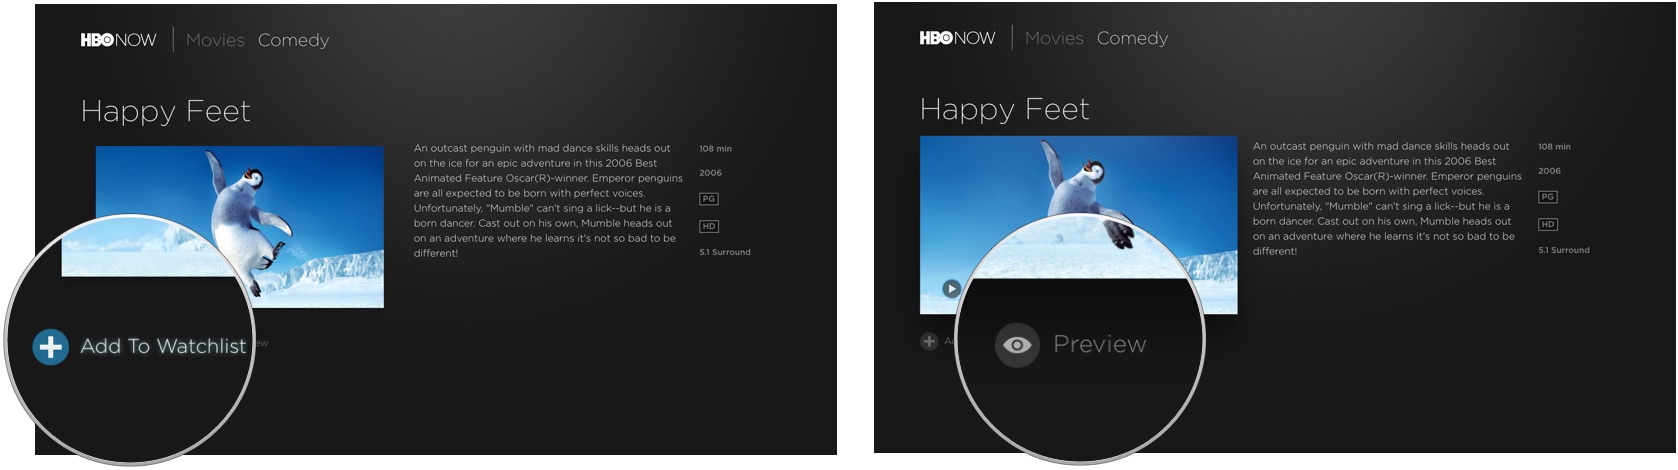 Selecting a preview in HBO Now on Apple TV